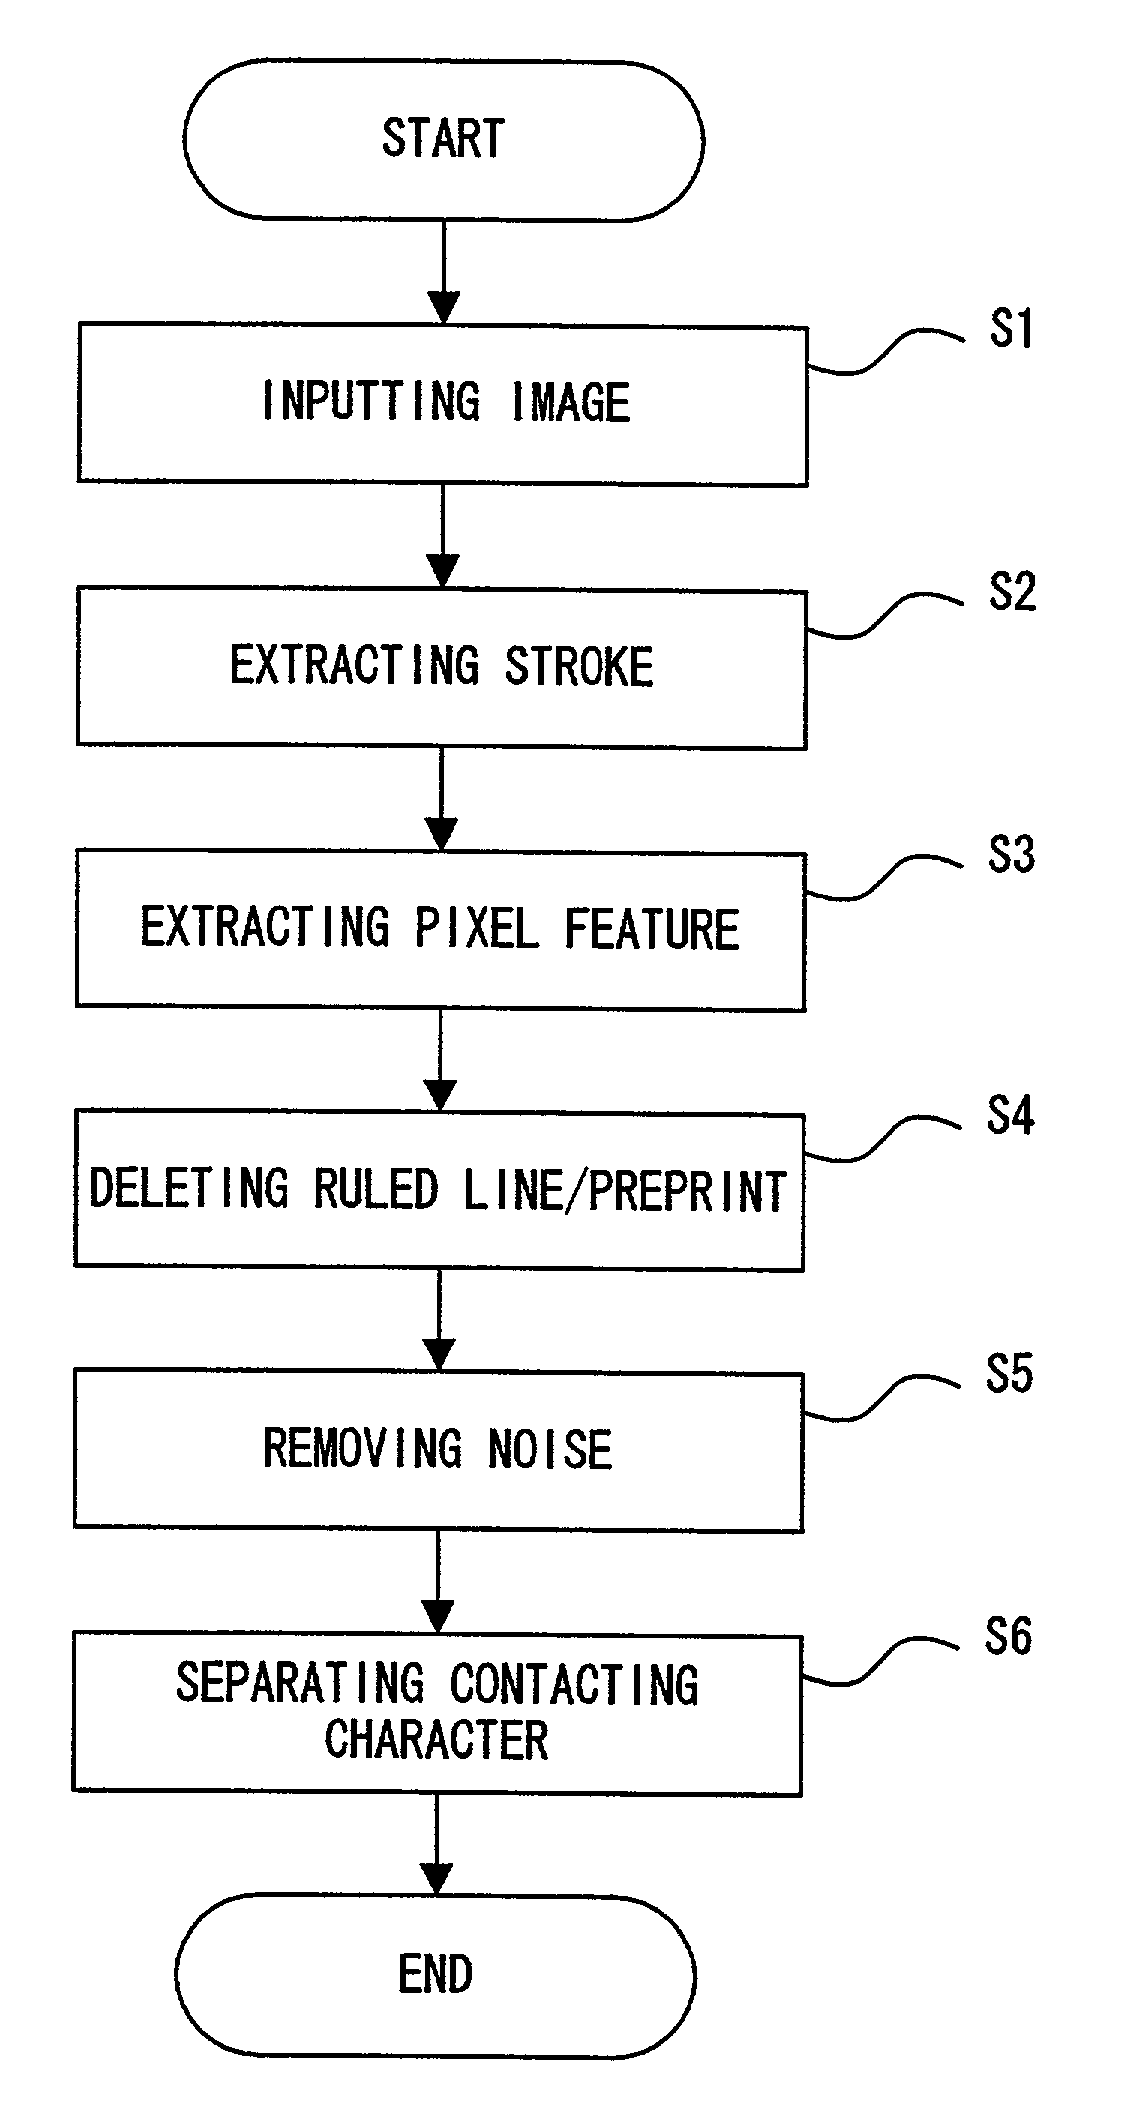 Image processing apparatus and method generating binary image from a multilevel image